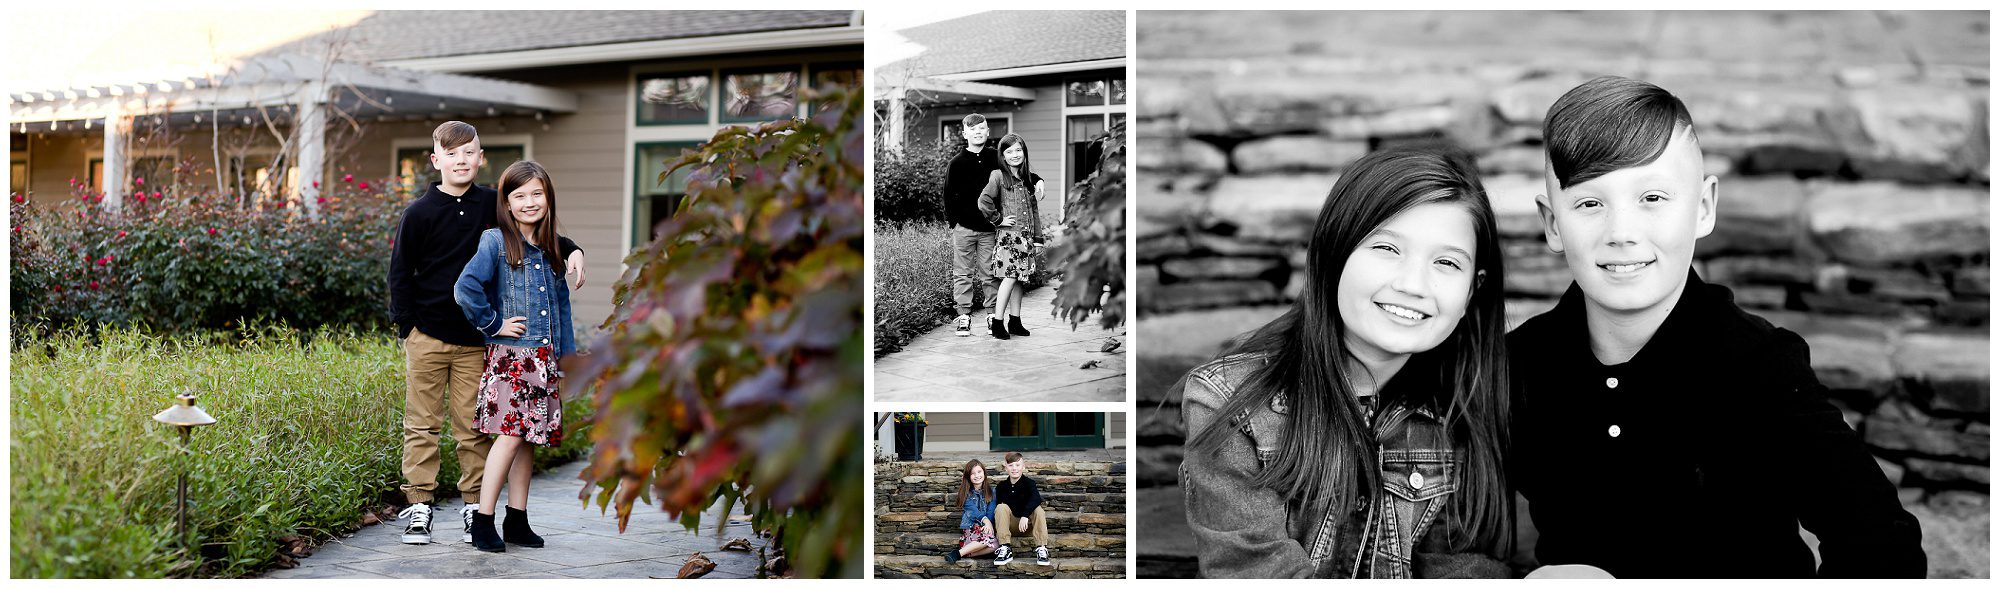 Fluvanna family portraits fall photographer cville louisa pictures siblings virginia session photography charlottesville golf spring creek zion crossroad